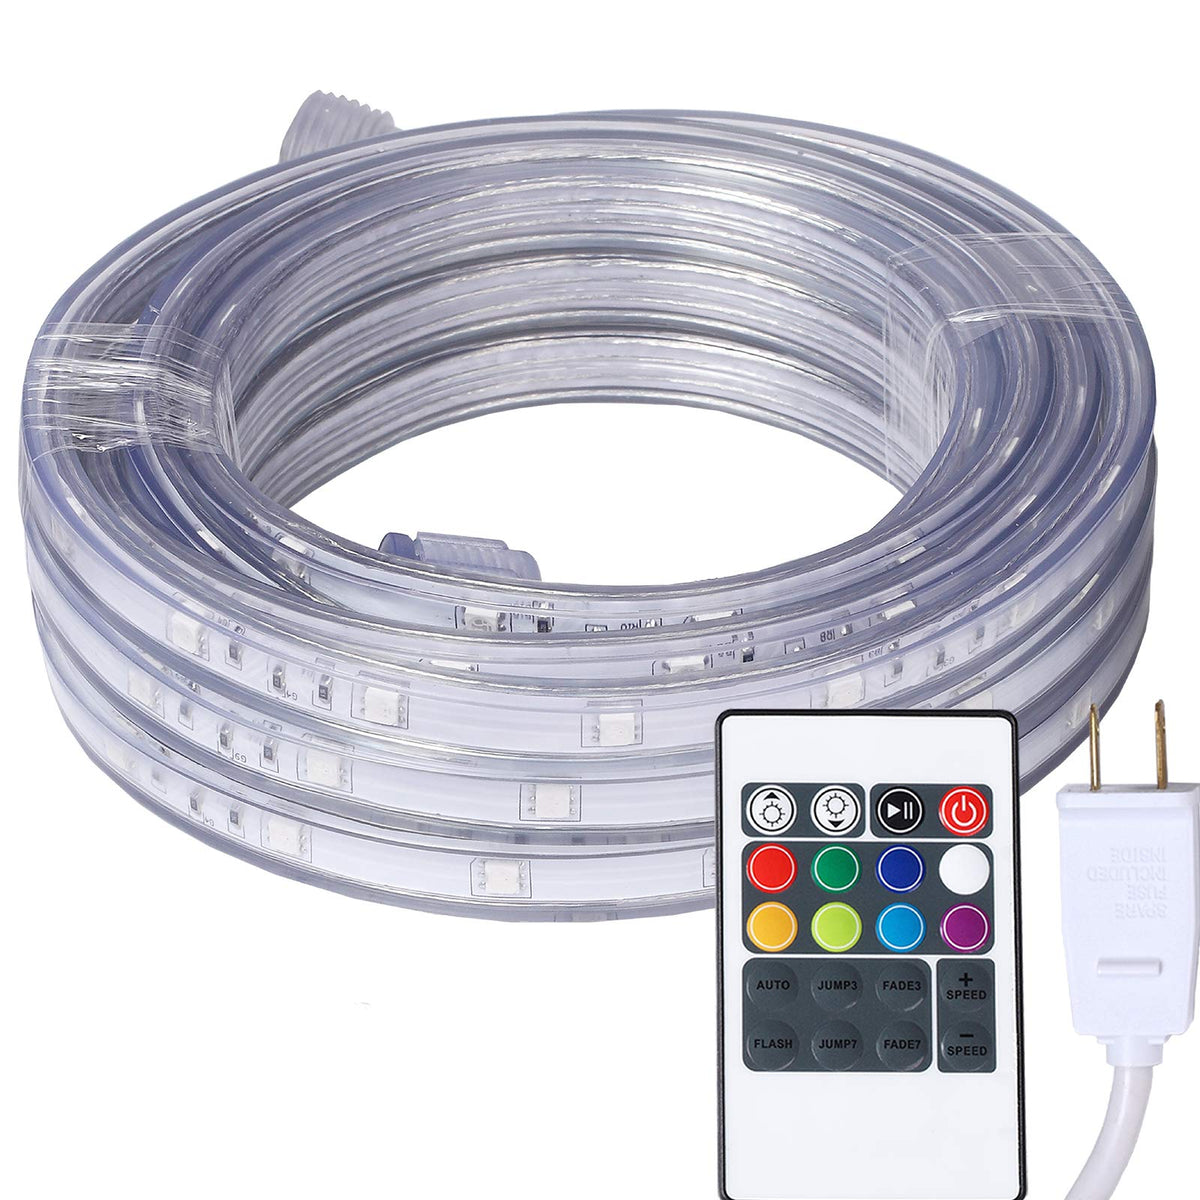 Areful 33ft LED Rope Lights, Color Changing Strip Lights with